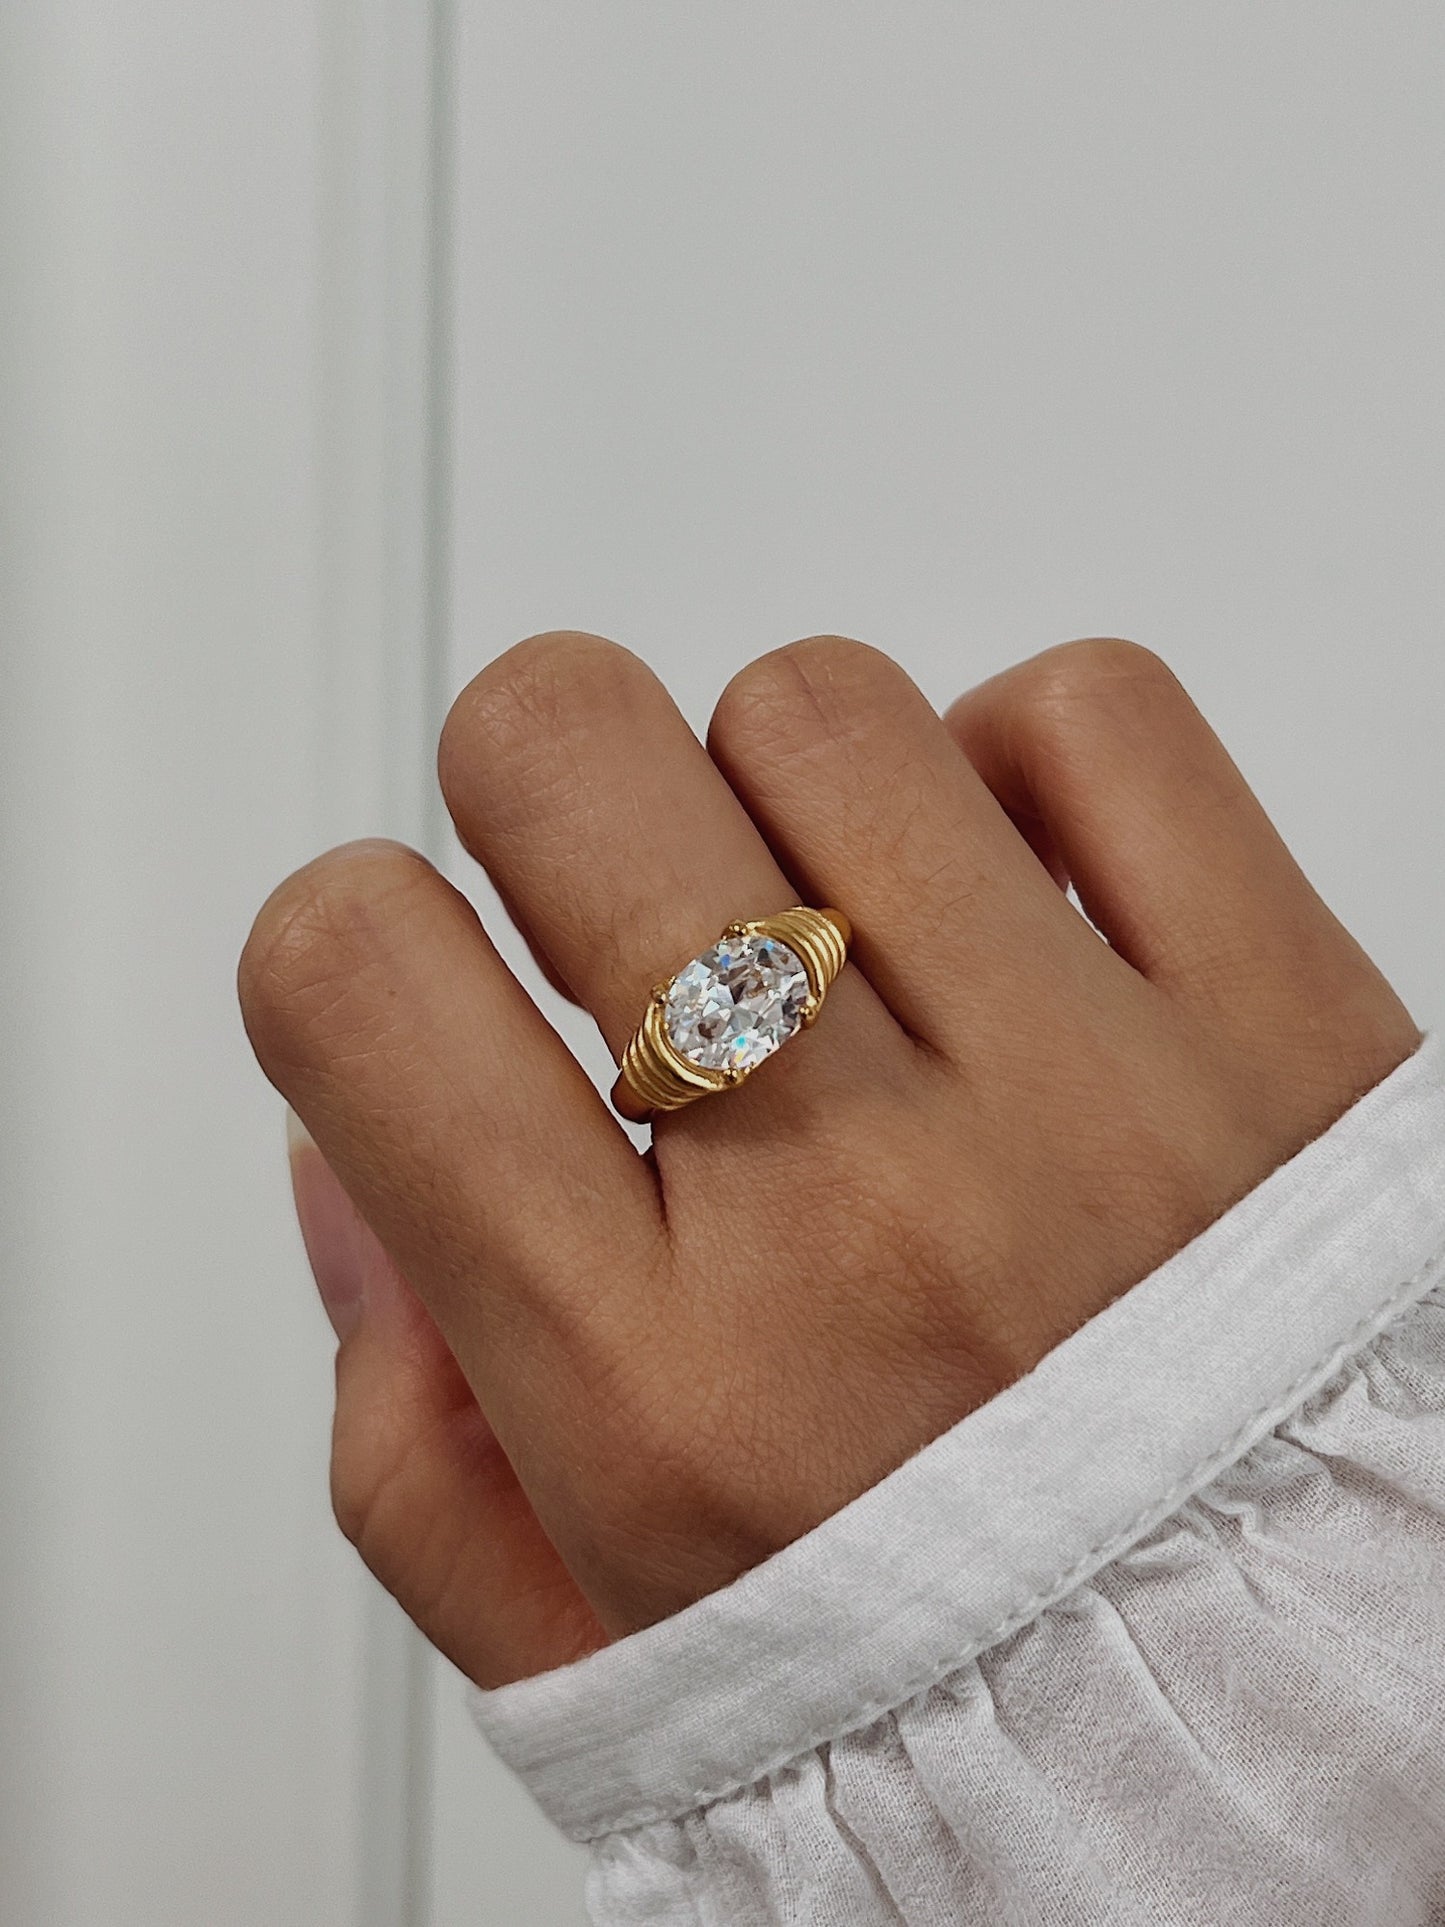 chunky cz ring, Clear Gemstone Ring, Oval Cut CZ Ring, Gold CZ Ring, 18K Gold Oval Ring, Cubic Zirconia Ring, Statement Ring, Stacking Ring, cz dome ring